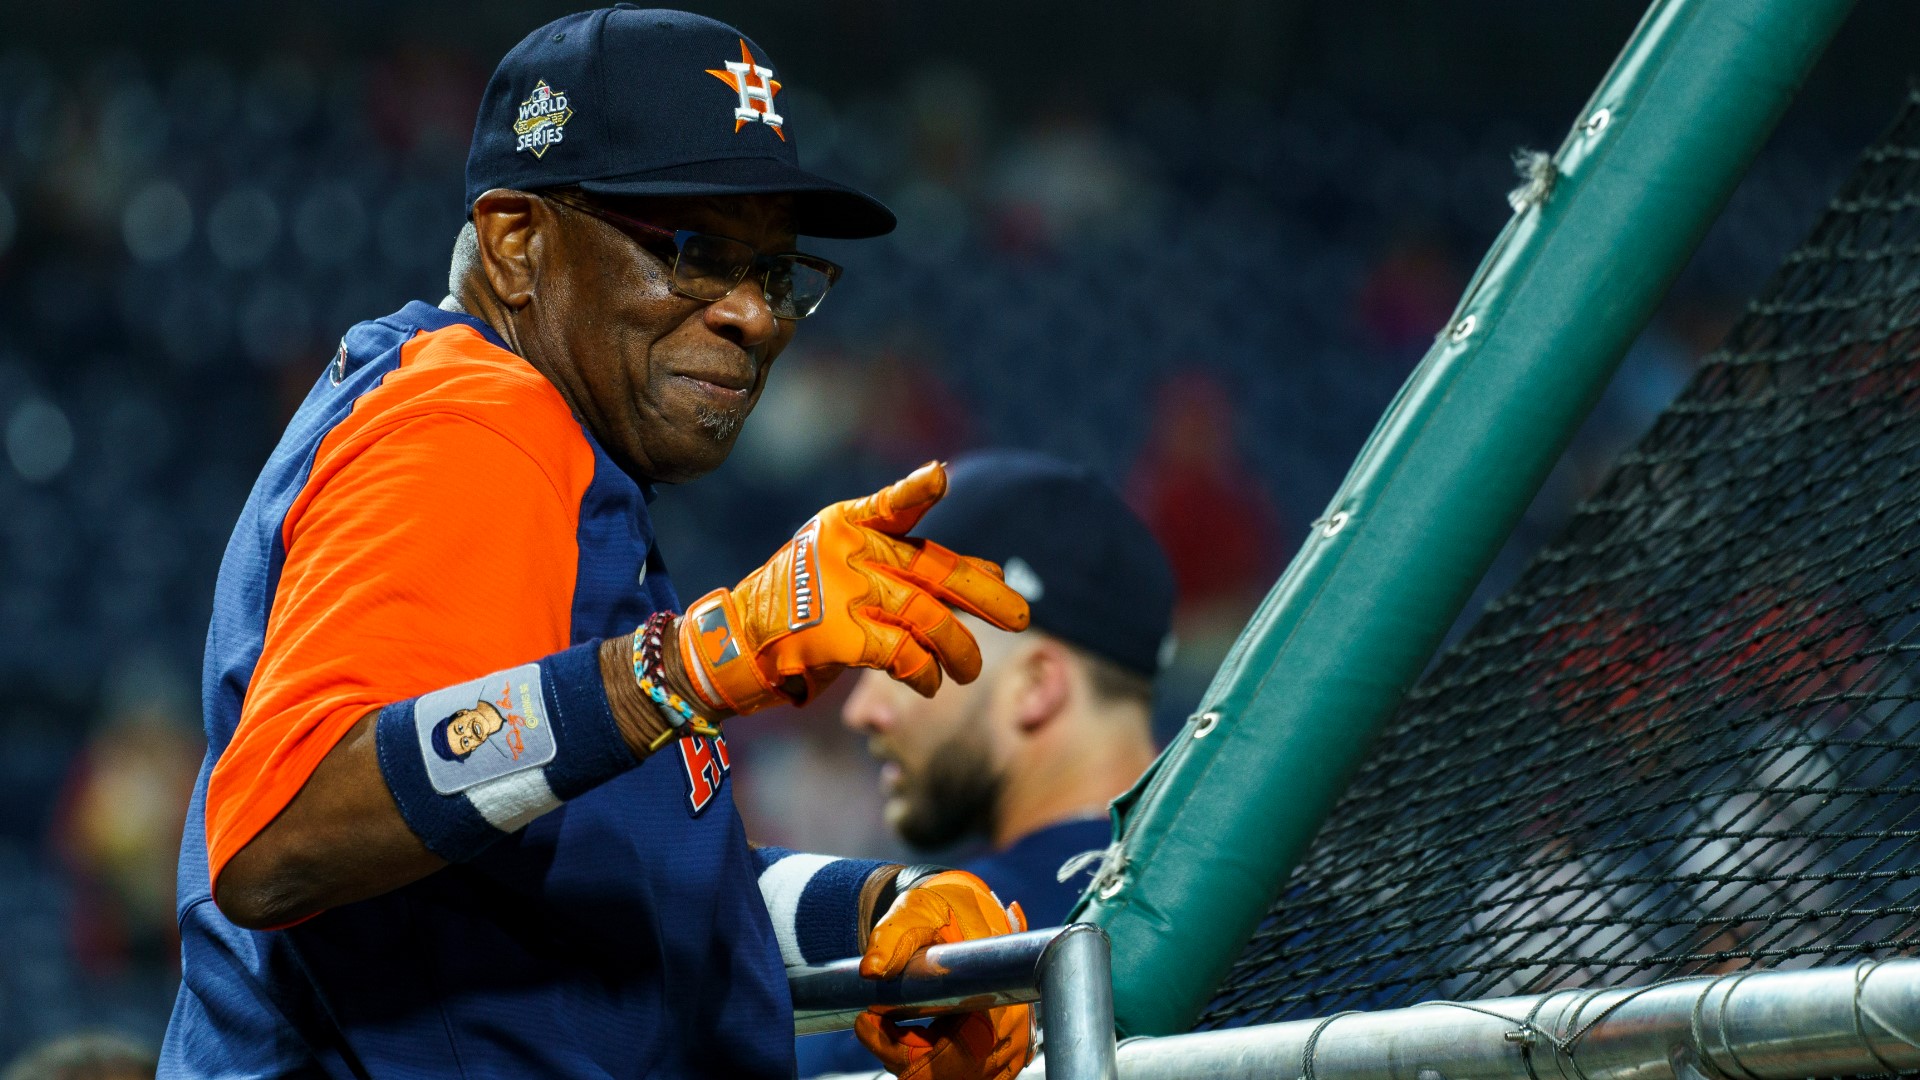 Since joining the team in 2020, Houston has made it to the ALCS all three years under Dusty Baker.